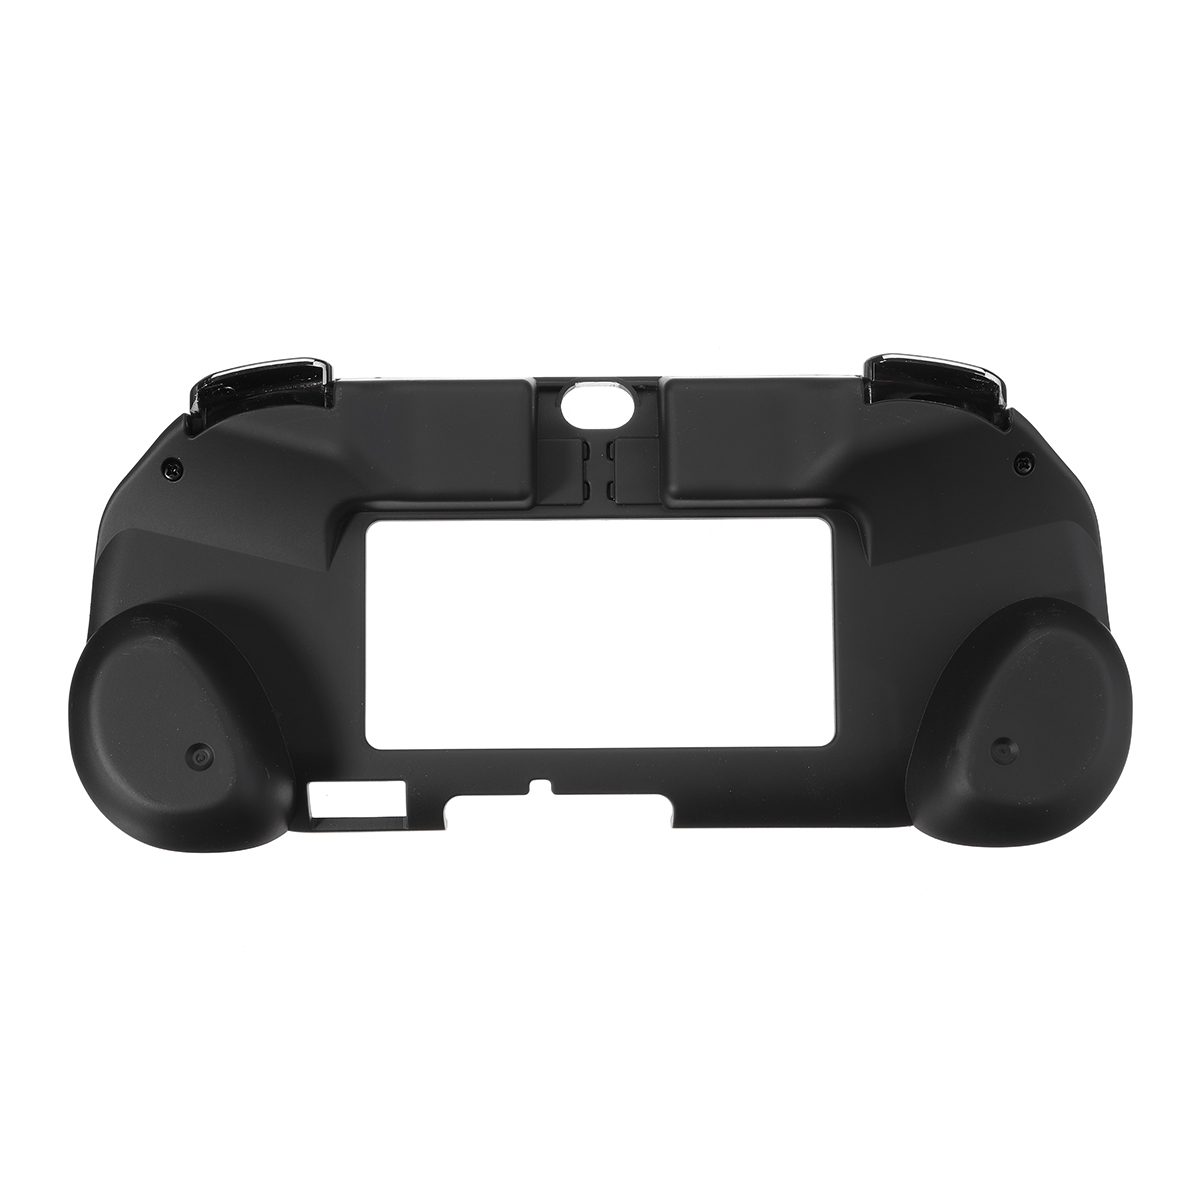 L2 R2 Trigger Grips Handle Shell Protective Case for Sony PlayStation PS Vita 2000 Game Console 11